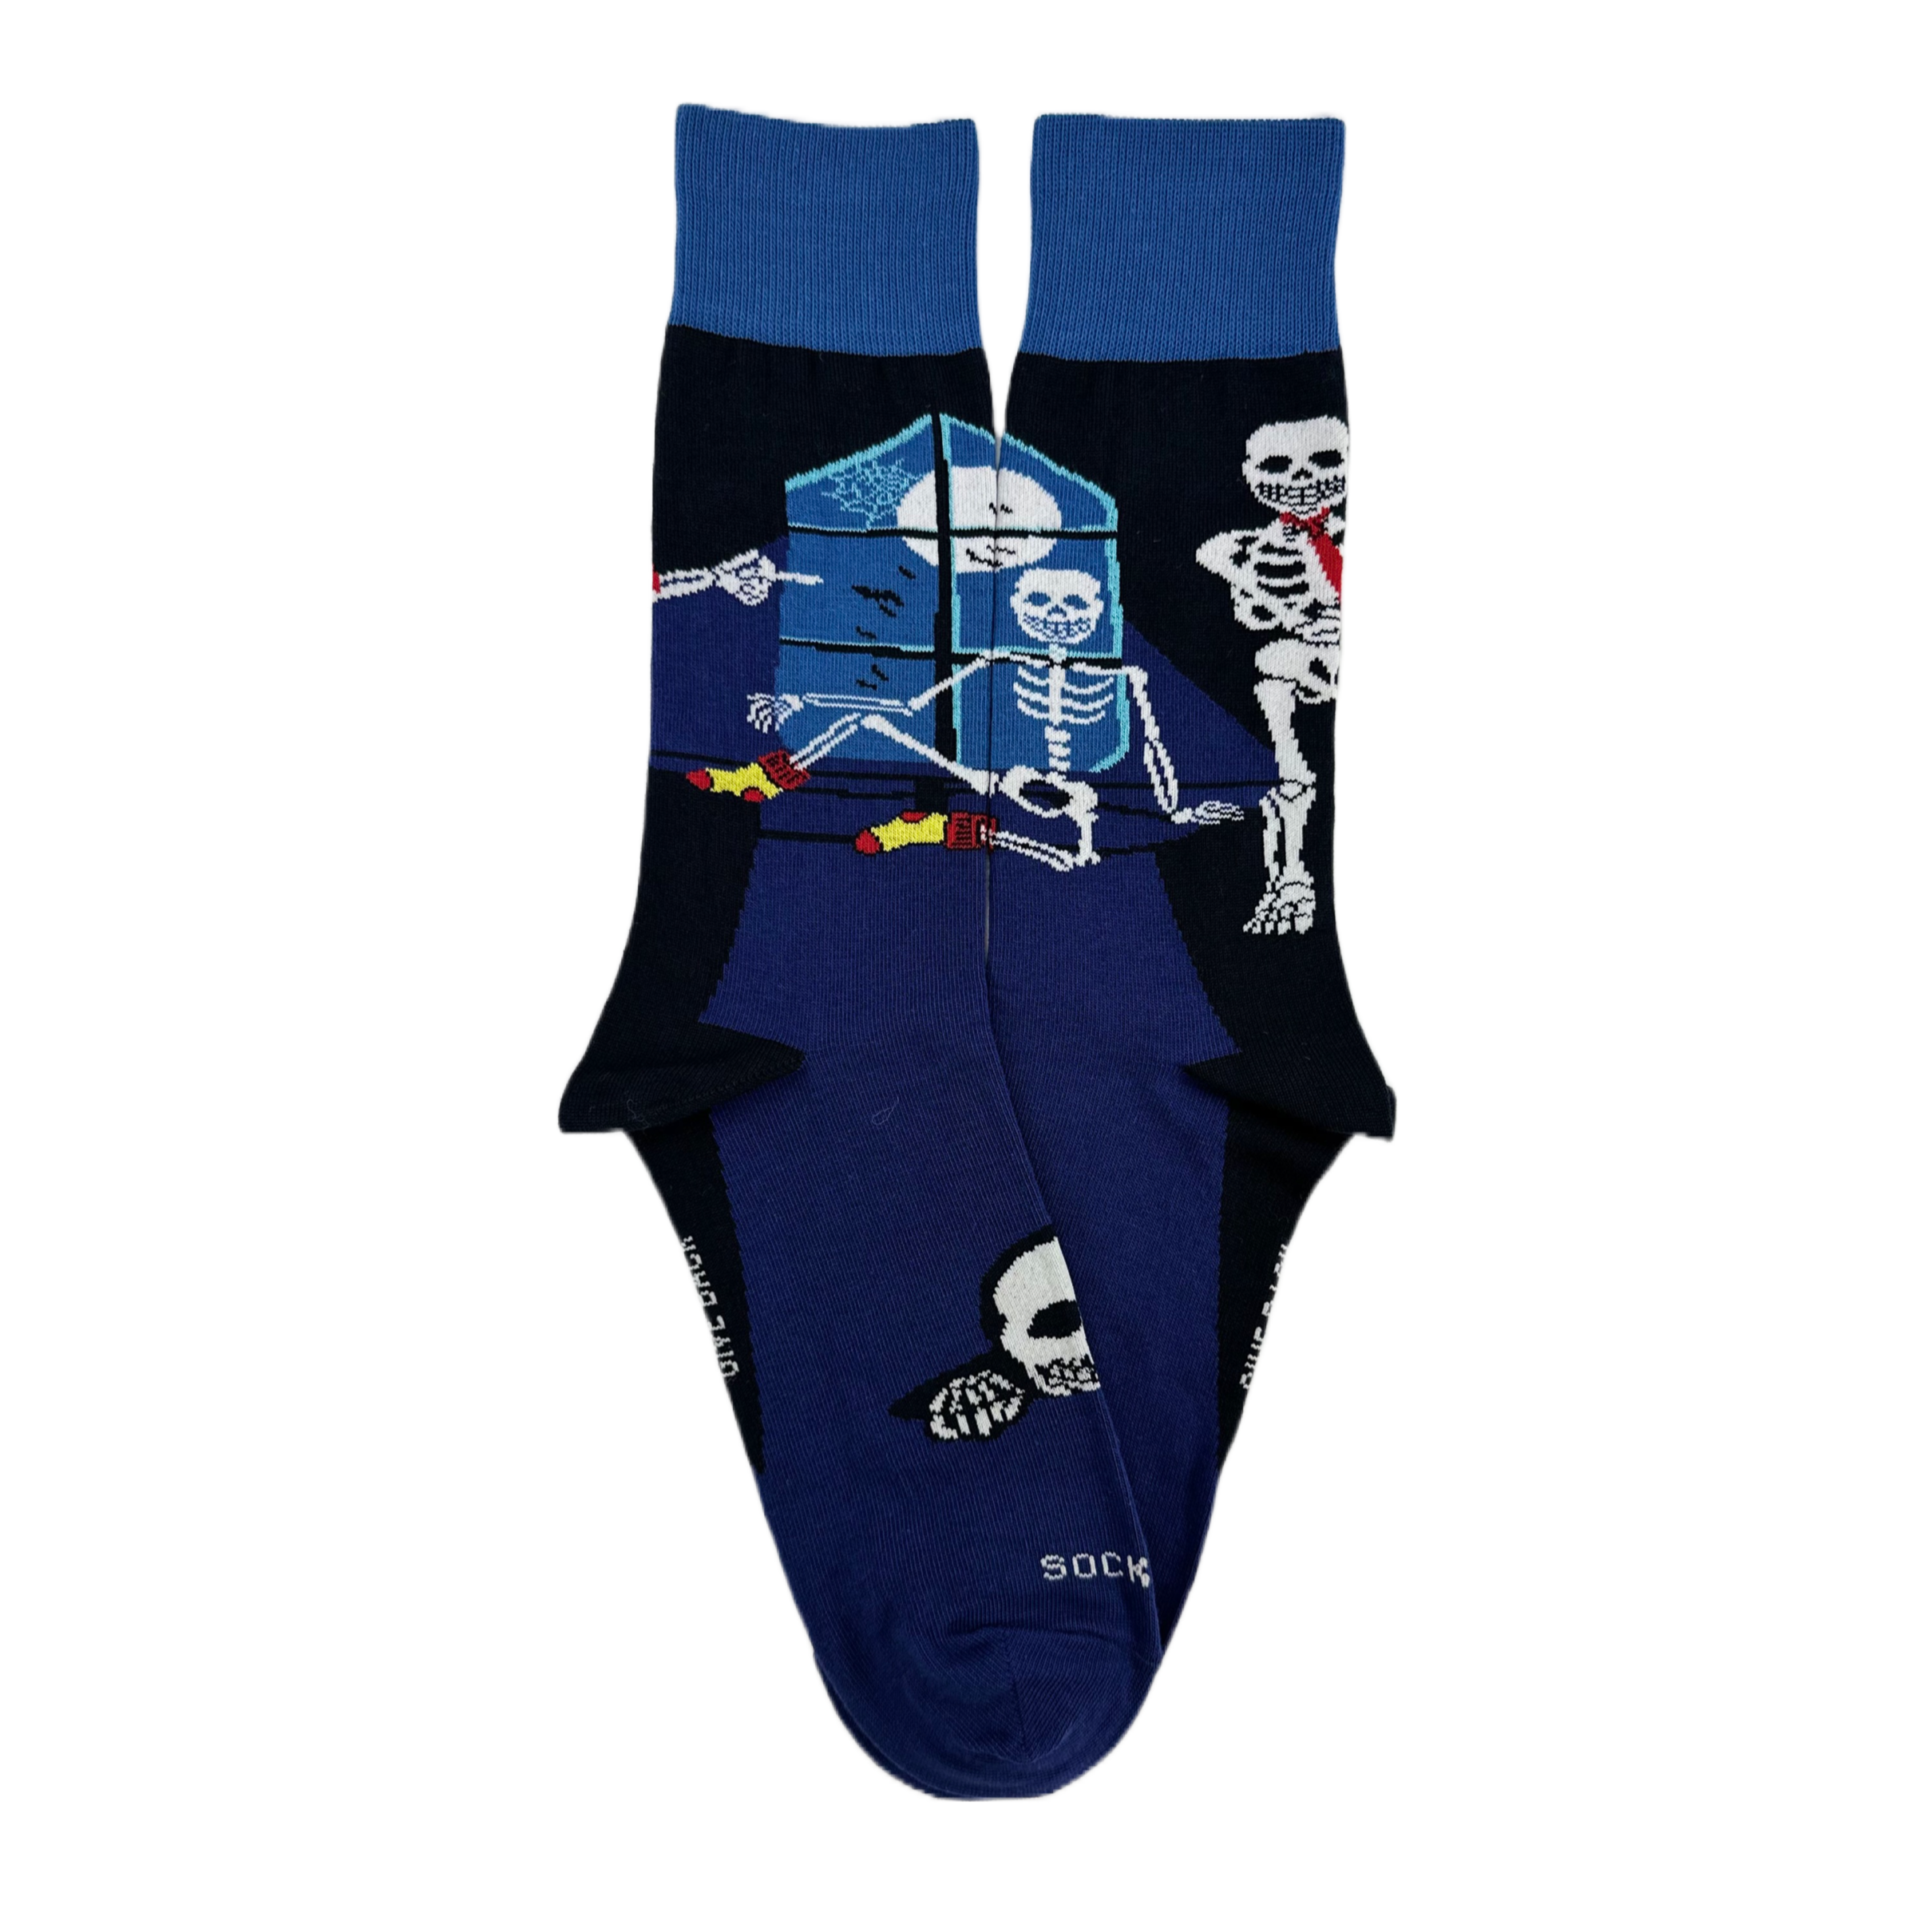 Skeleton by the Window Socks from the Sock Panda (Adult Large)